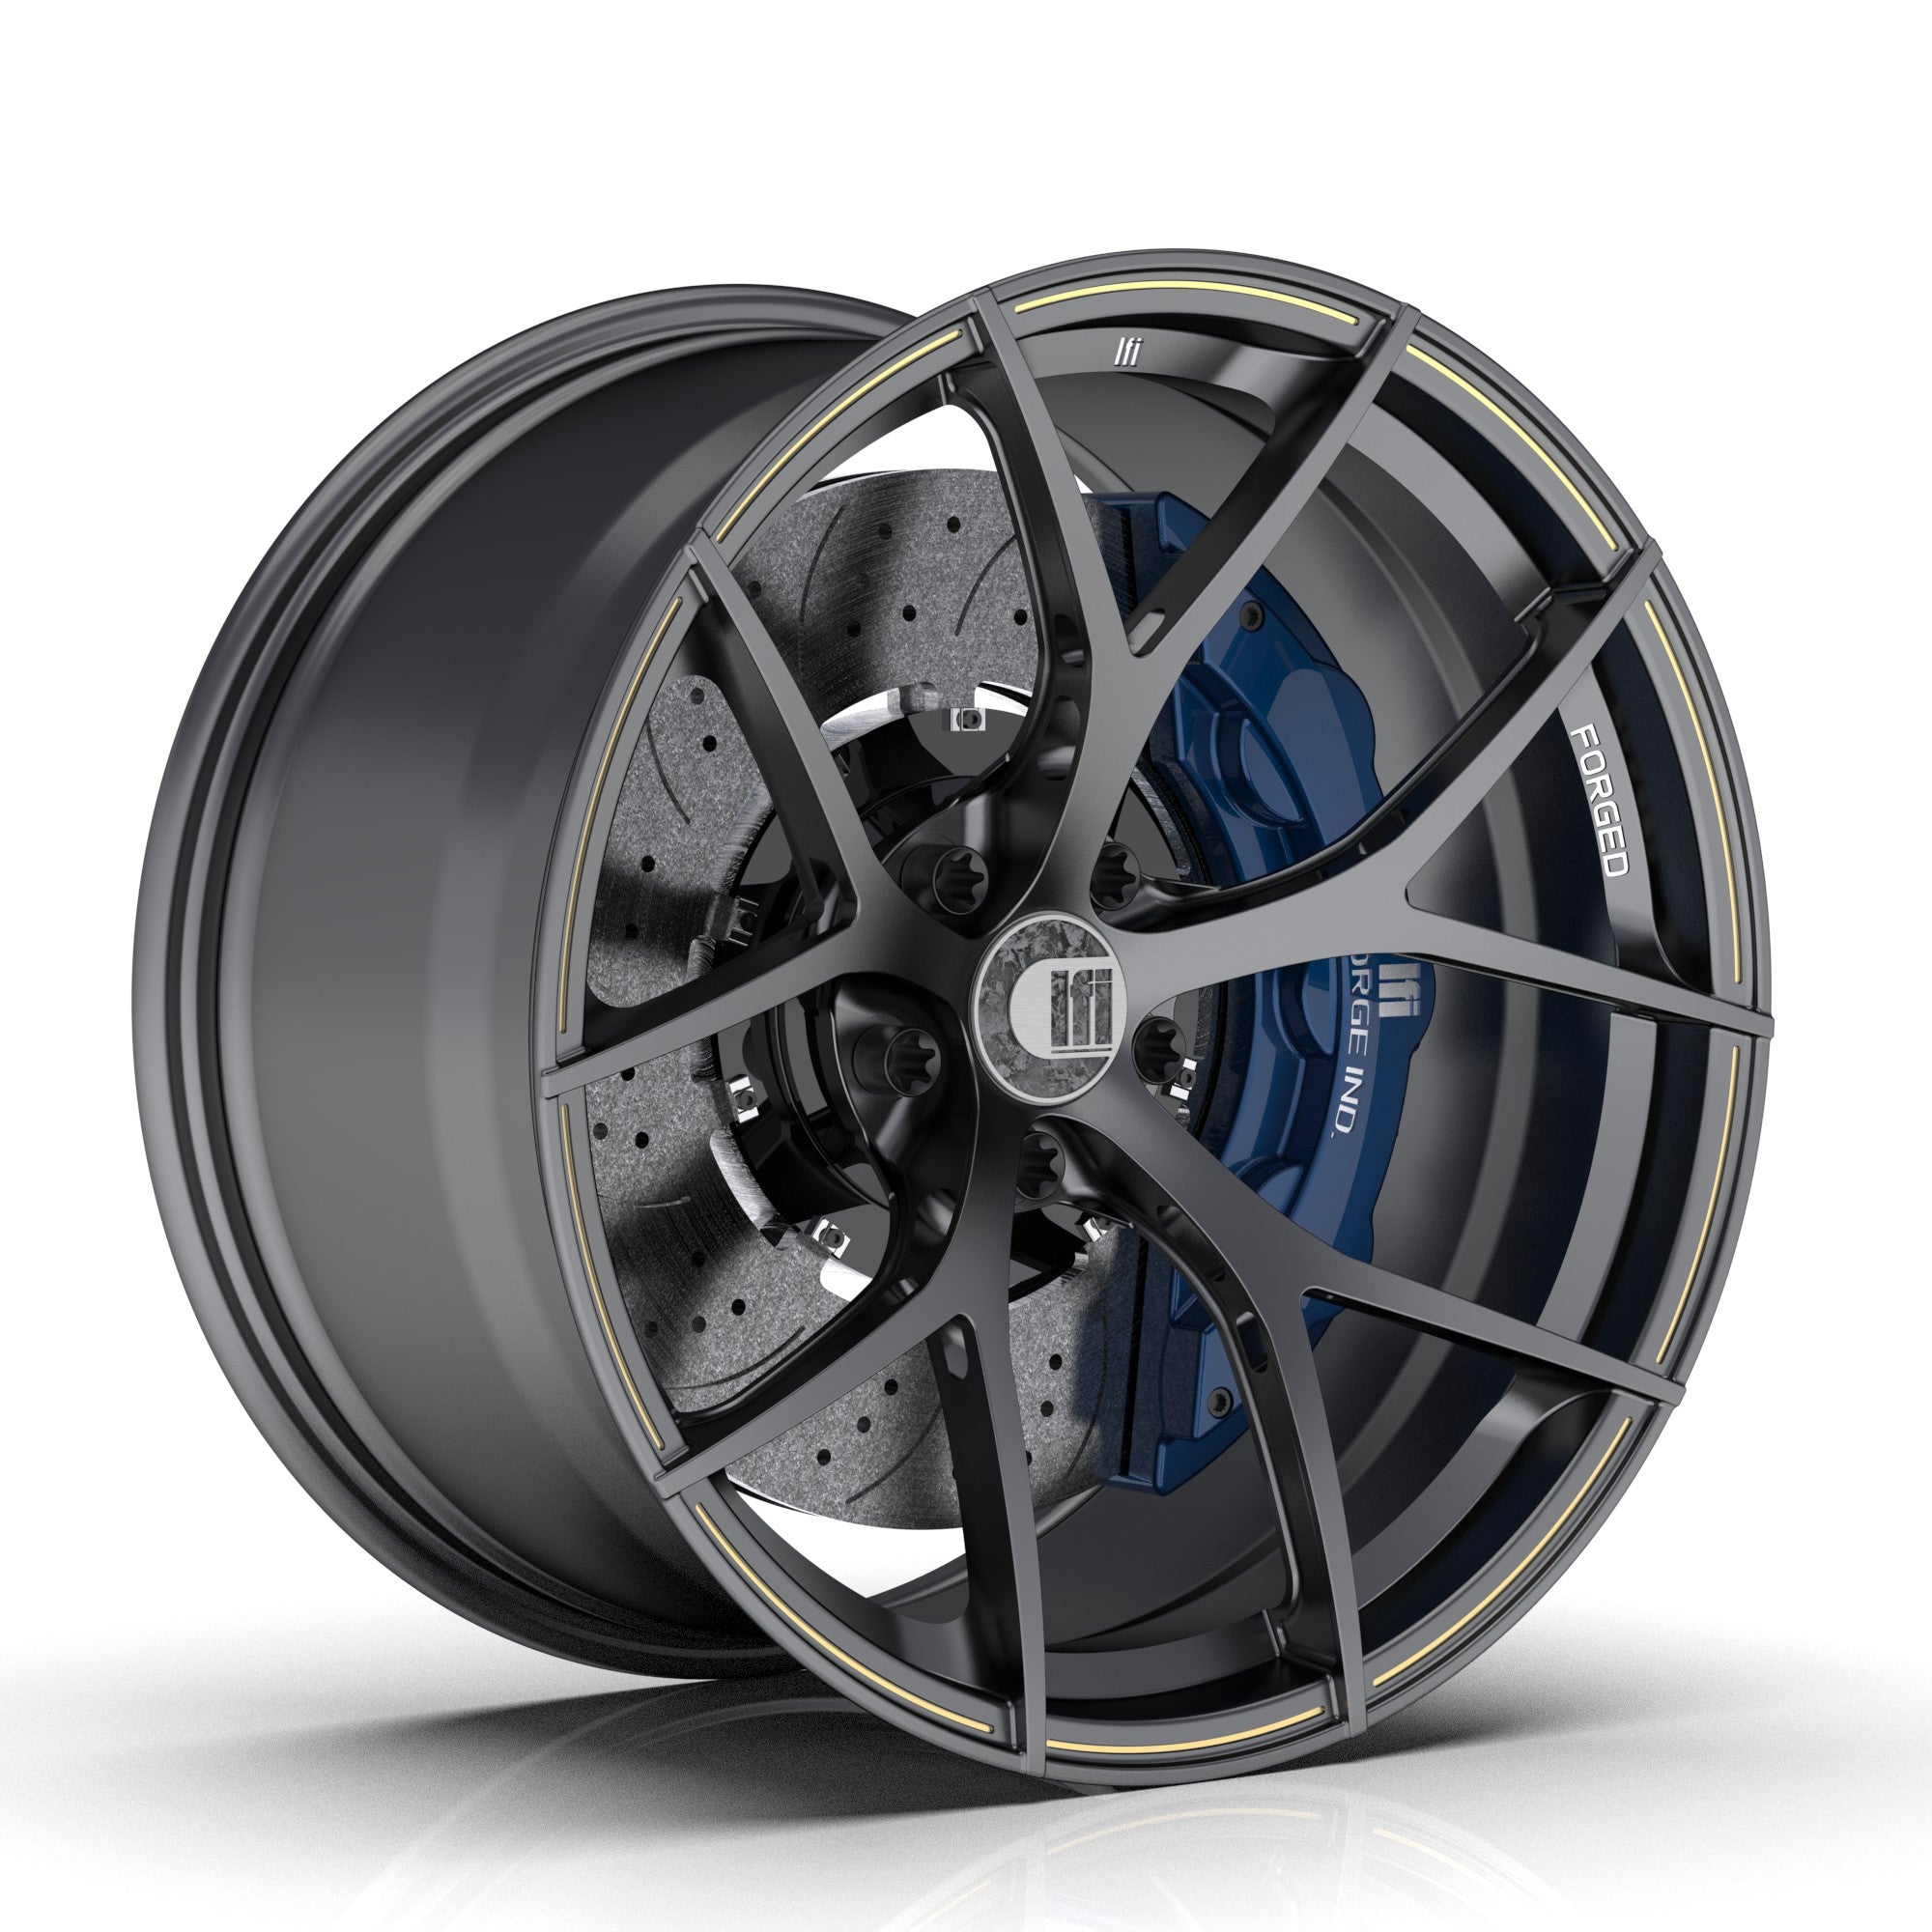 LFI REX-06 Founder's Edition Racing Forged Wheel